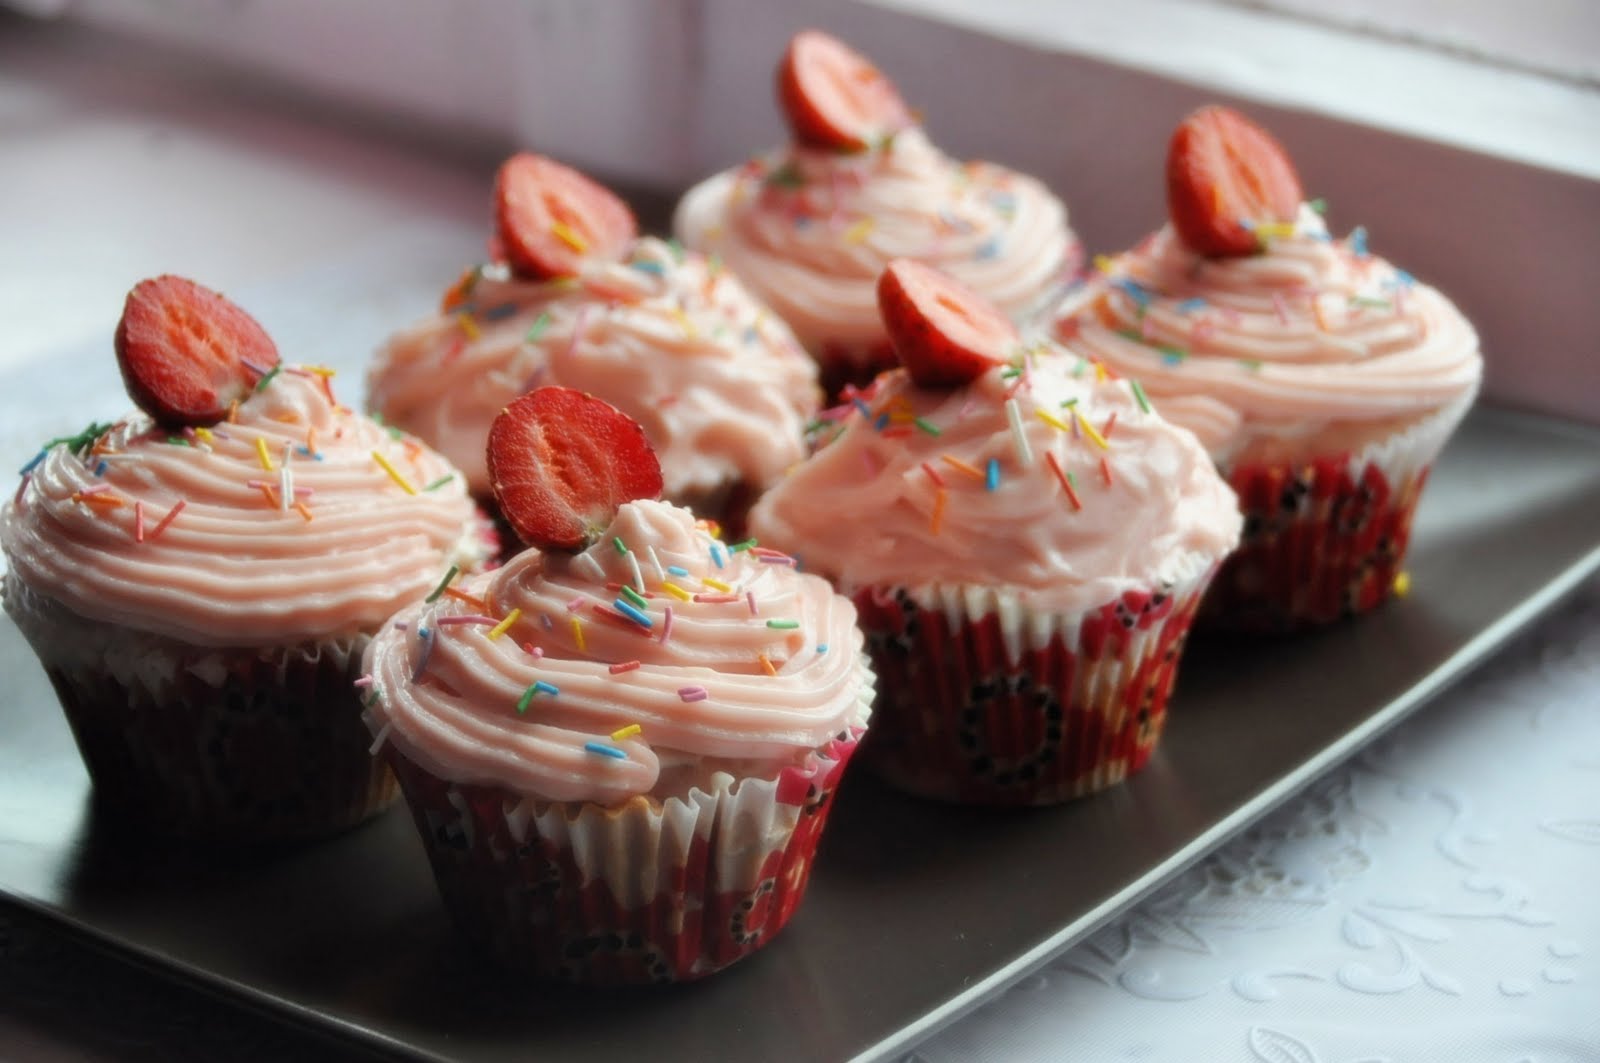 Strawberry Cupcakes with Cream Cheese Frosting.